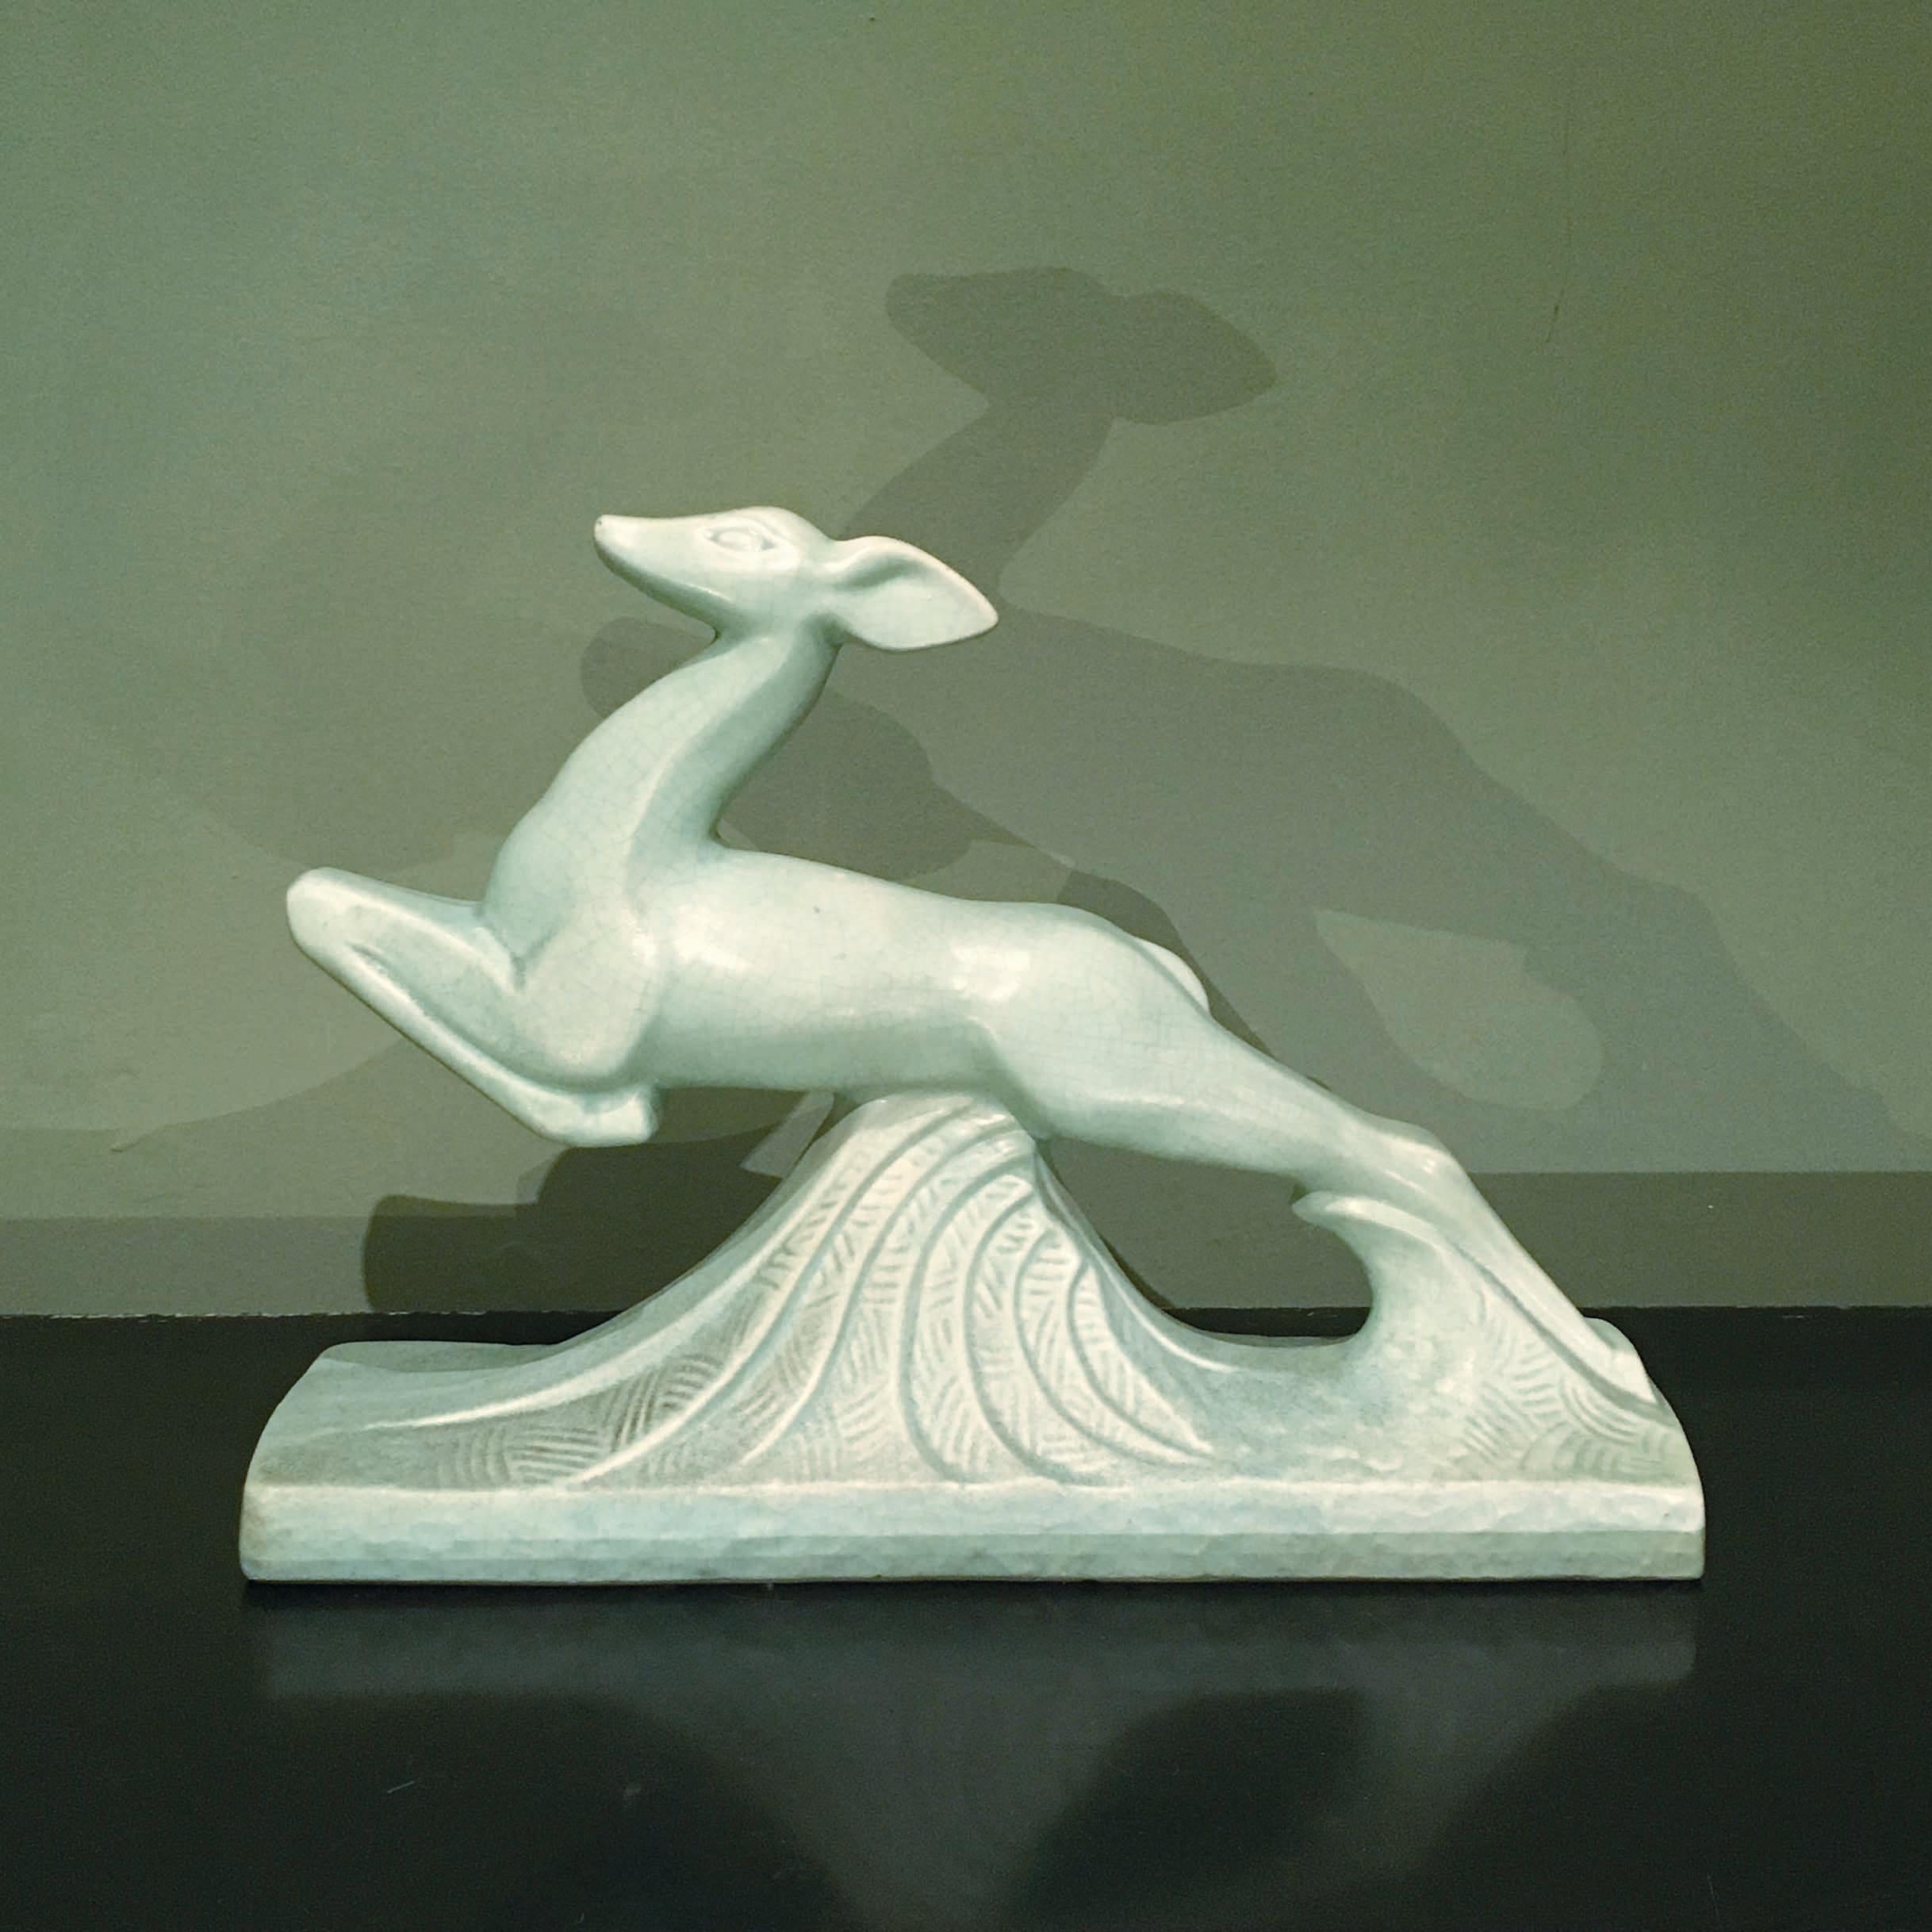 Early 20th Century Art Deco Crackle Glazed Ceramic Figure of a Jumping Antelope For Sale 4